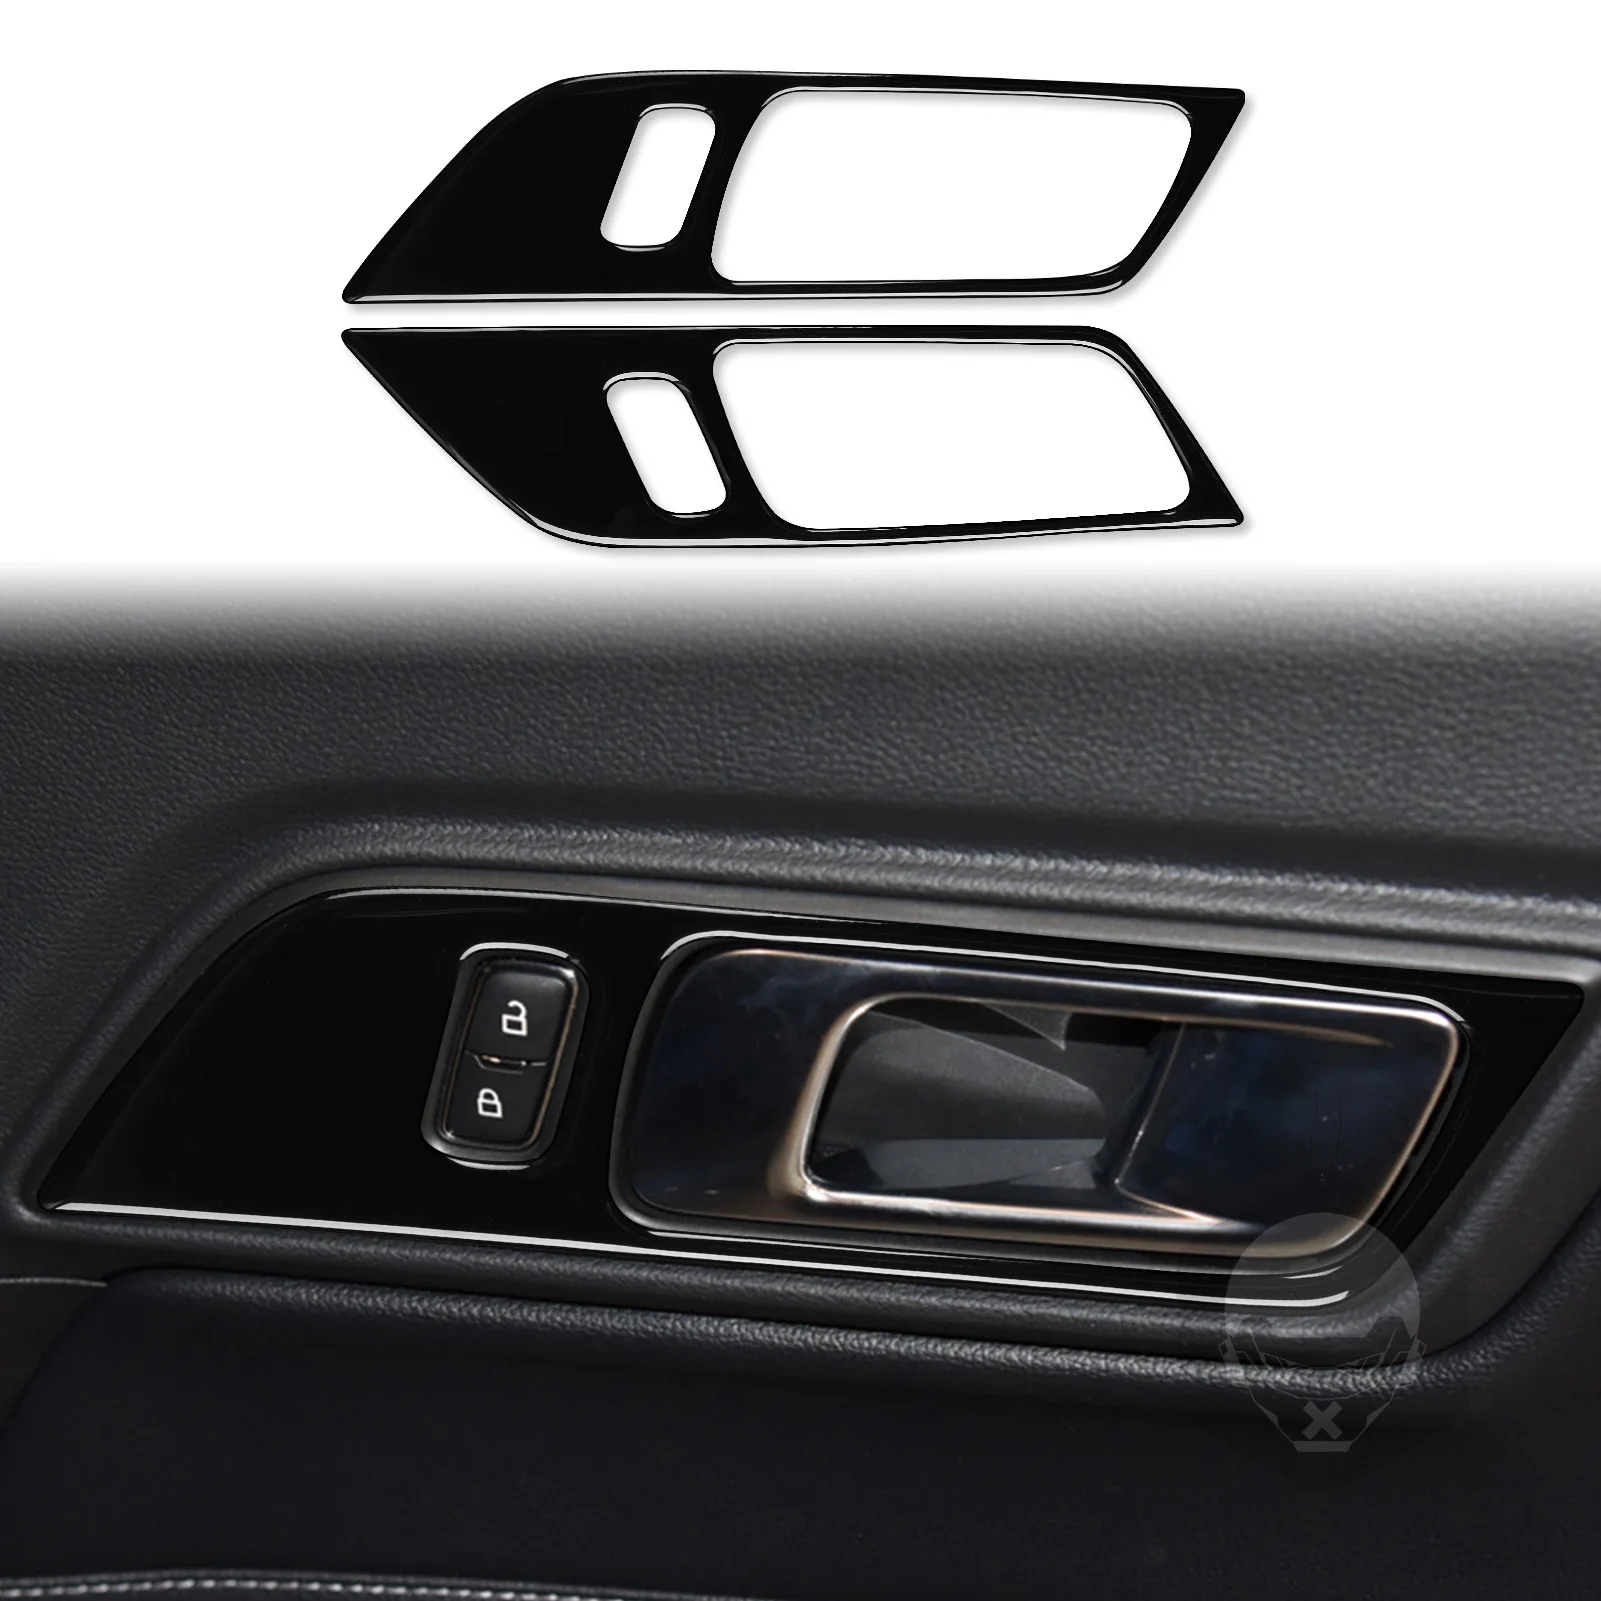 

for Ford Mustang 2015 2016 2017 2018 2019 2020 Door Plank Decoration Cover Trim Sticker Decal Car Accessories Plastic